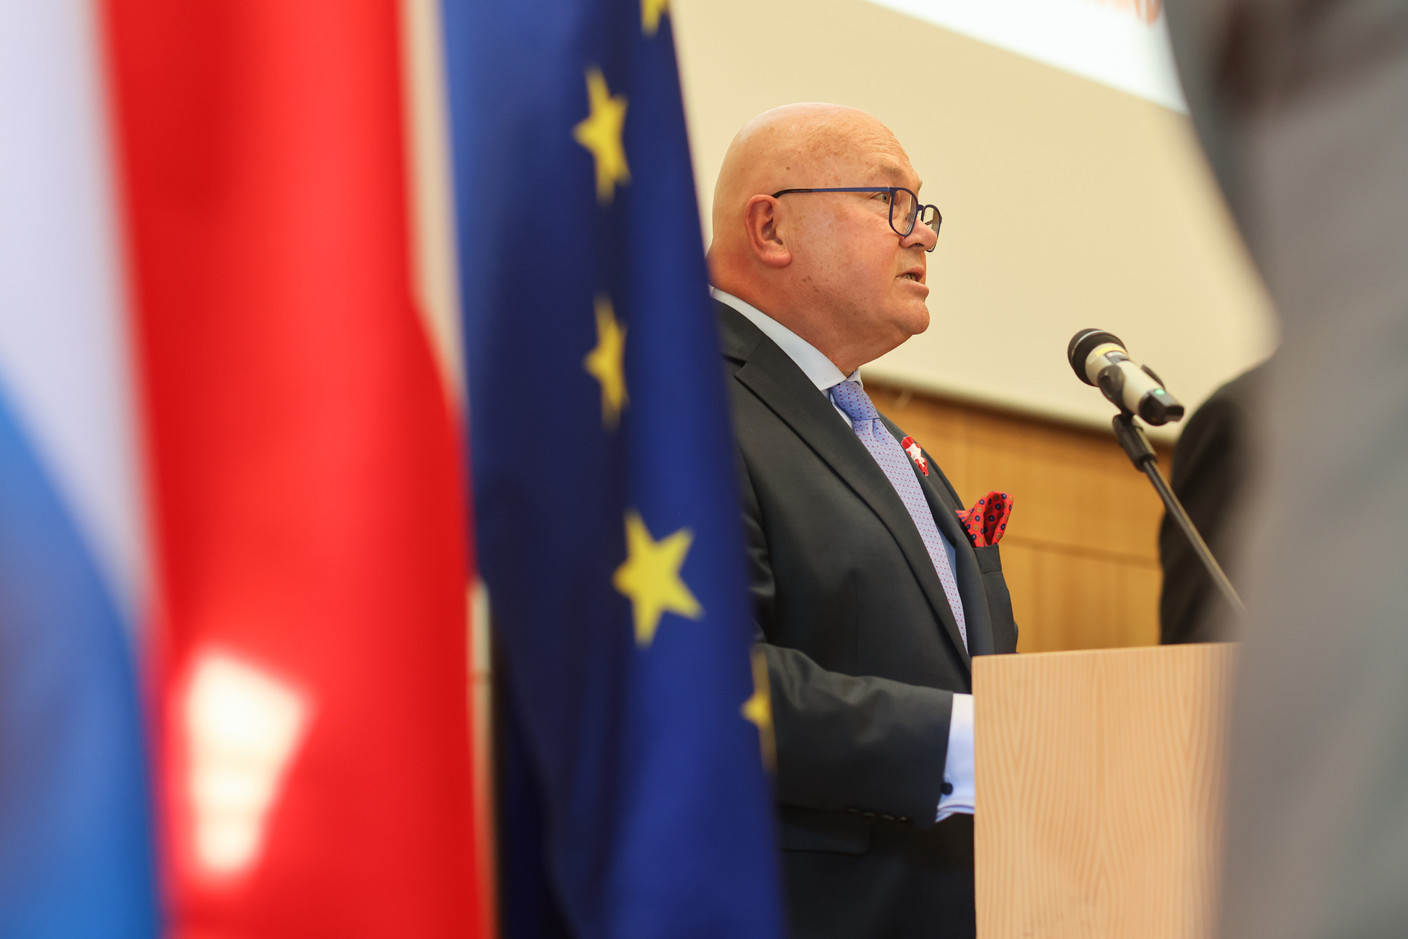 Poland’s ambassador to Luxembourg, Piotr Wojtczak, speaking at 3rd May Constitution Day. Photo: Guy Wolff/Maison Moderne